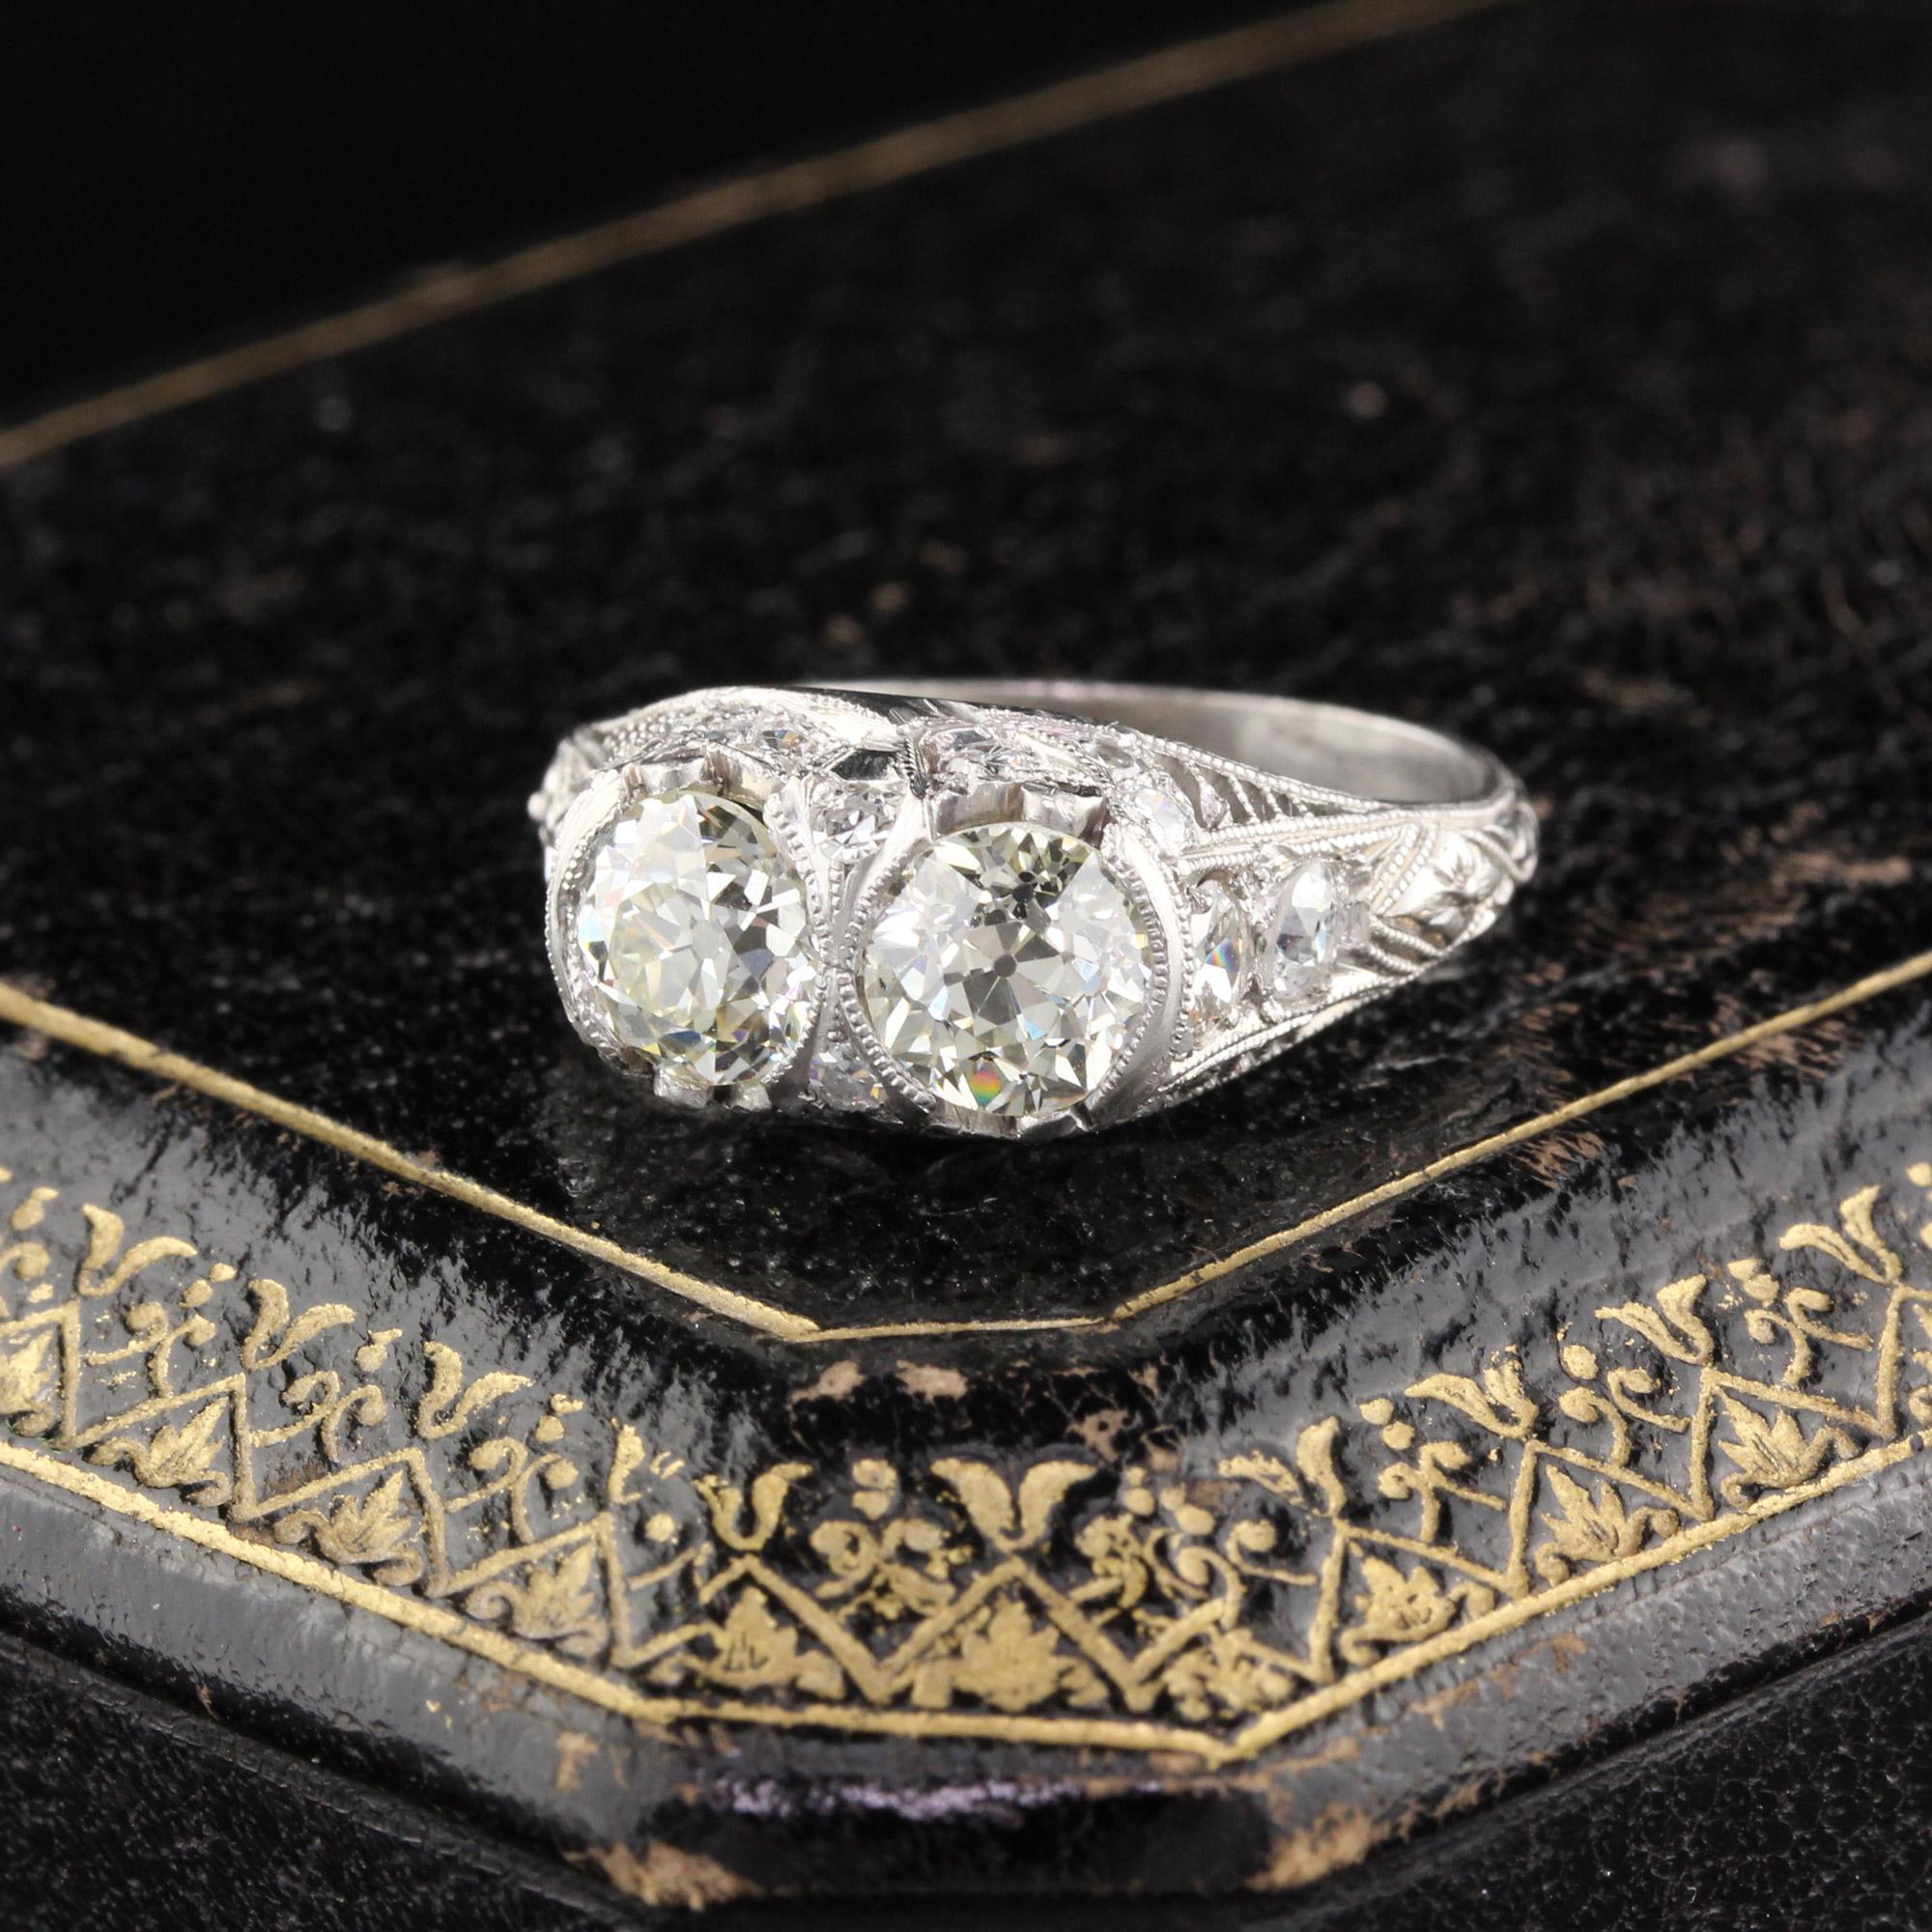 Stunning Edwardian 2-stone engagement ring in platinum with detailed filigree & engravings. The diamonds are sparkly & lively!

Item #R0142

Metal: Platinum 

Weight: 4.6 Grams

Center Diamond Weight: 0.83 cts & 0.84 cts

Center Diamond Color: